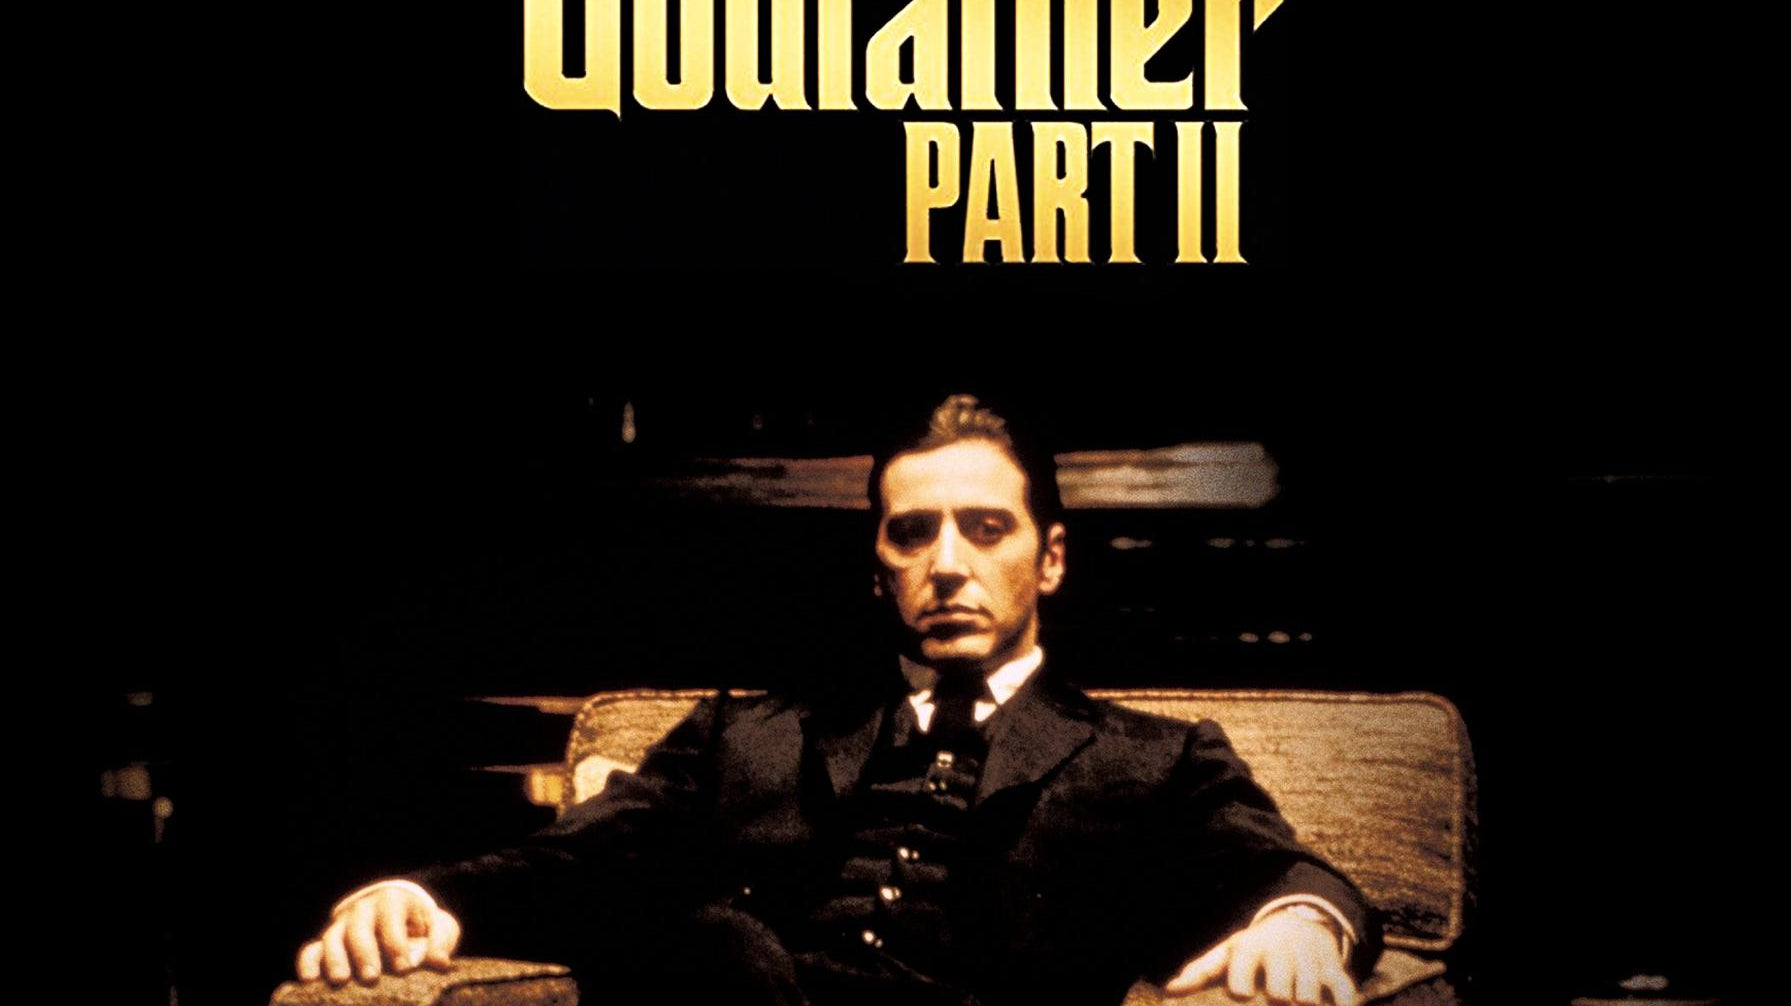 The Godfather Part II with Al Pacino as Michael Corleone sitting on a chair